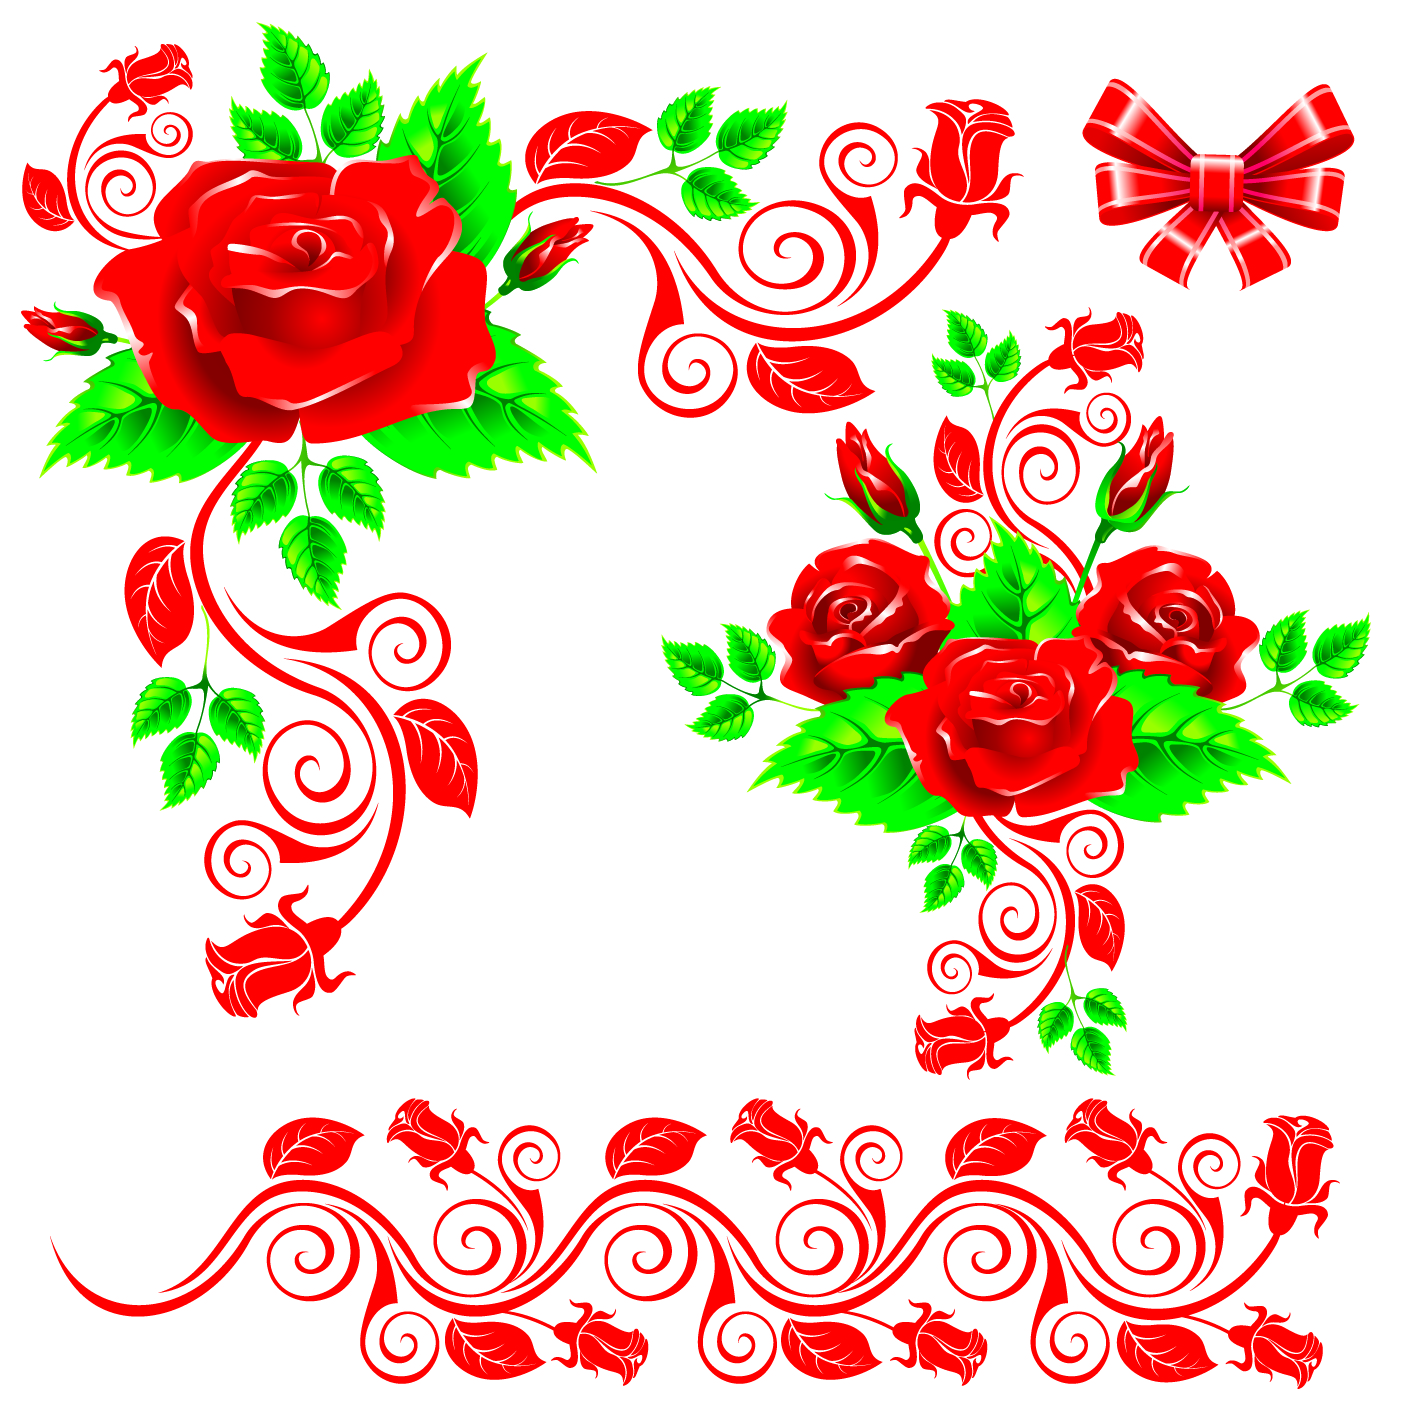 The beautiful rose lace vector Free Vector / 4Vector